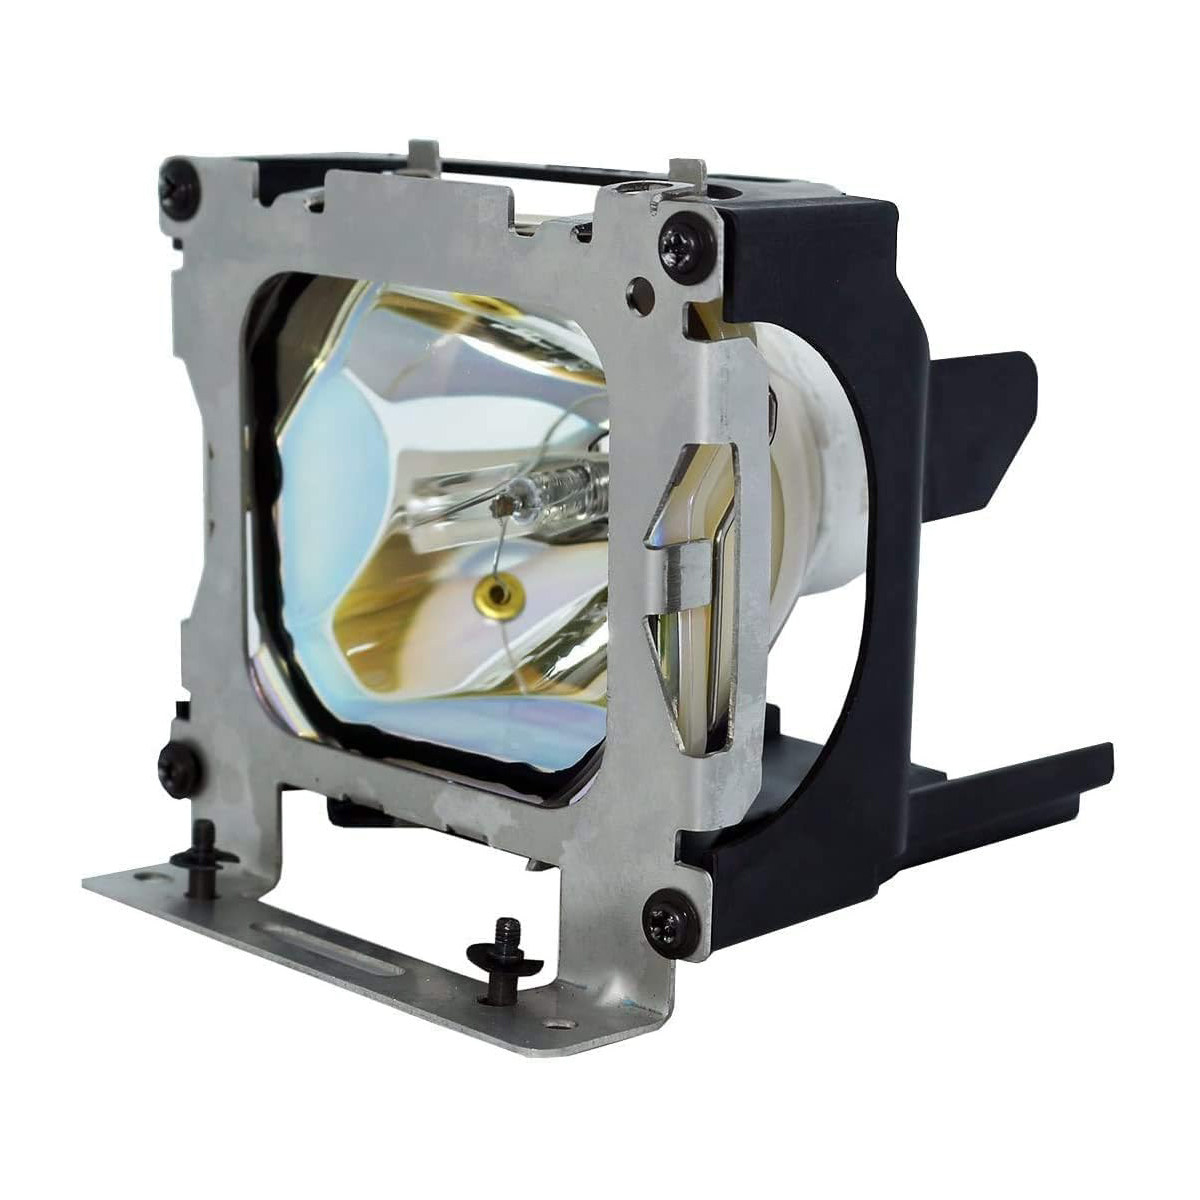 Replacement Projector lamp 78-6969-8919-9 For 3M MP8670 MP8745 MP8755 MP87 70